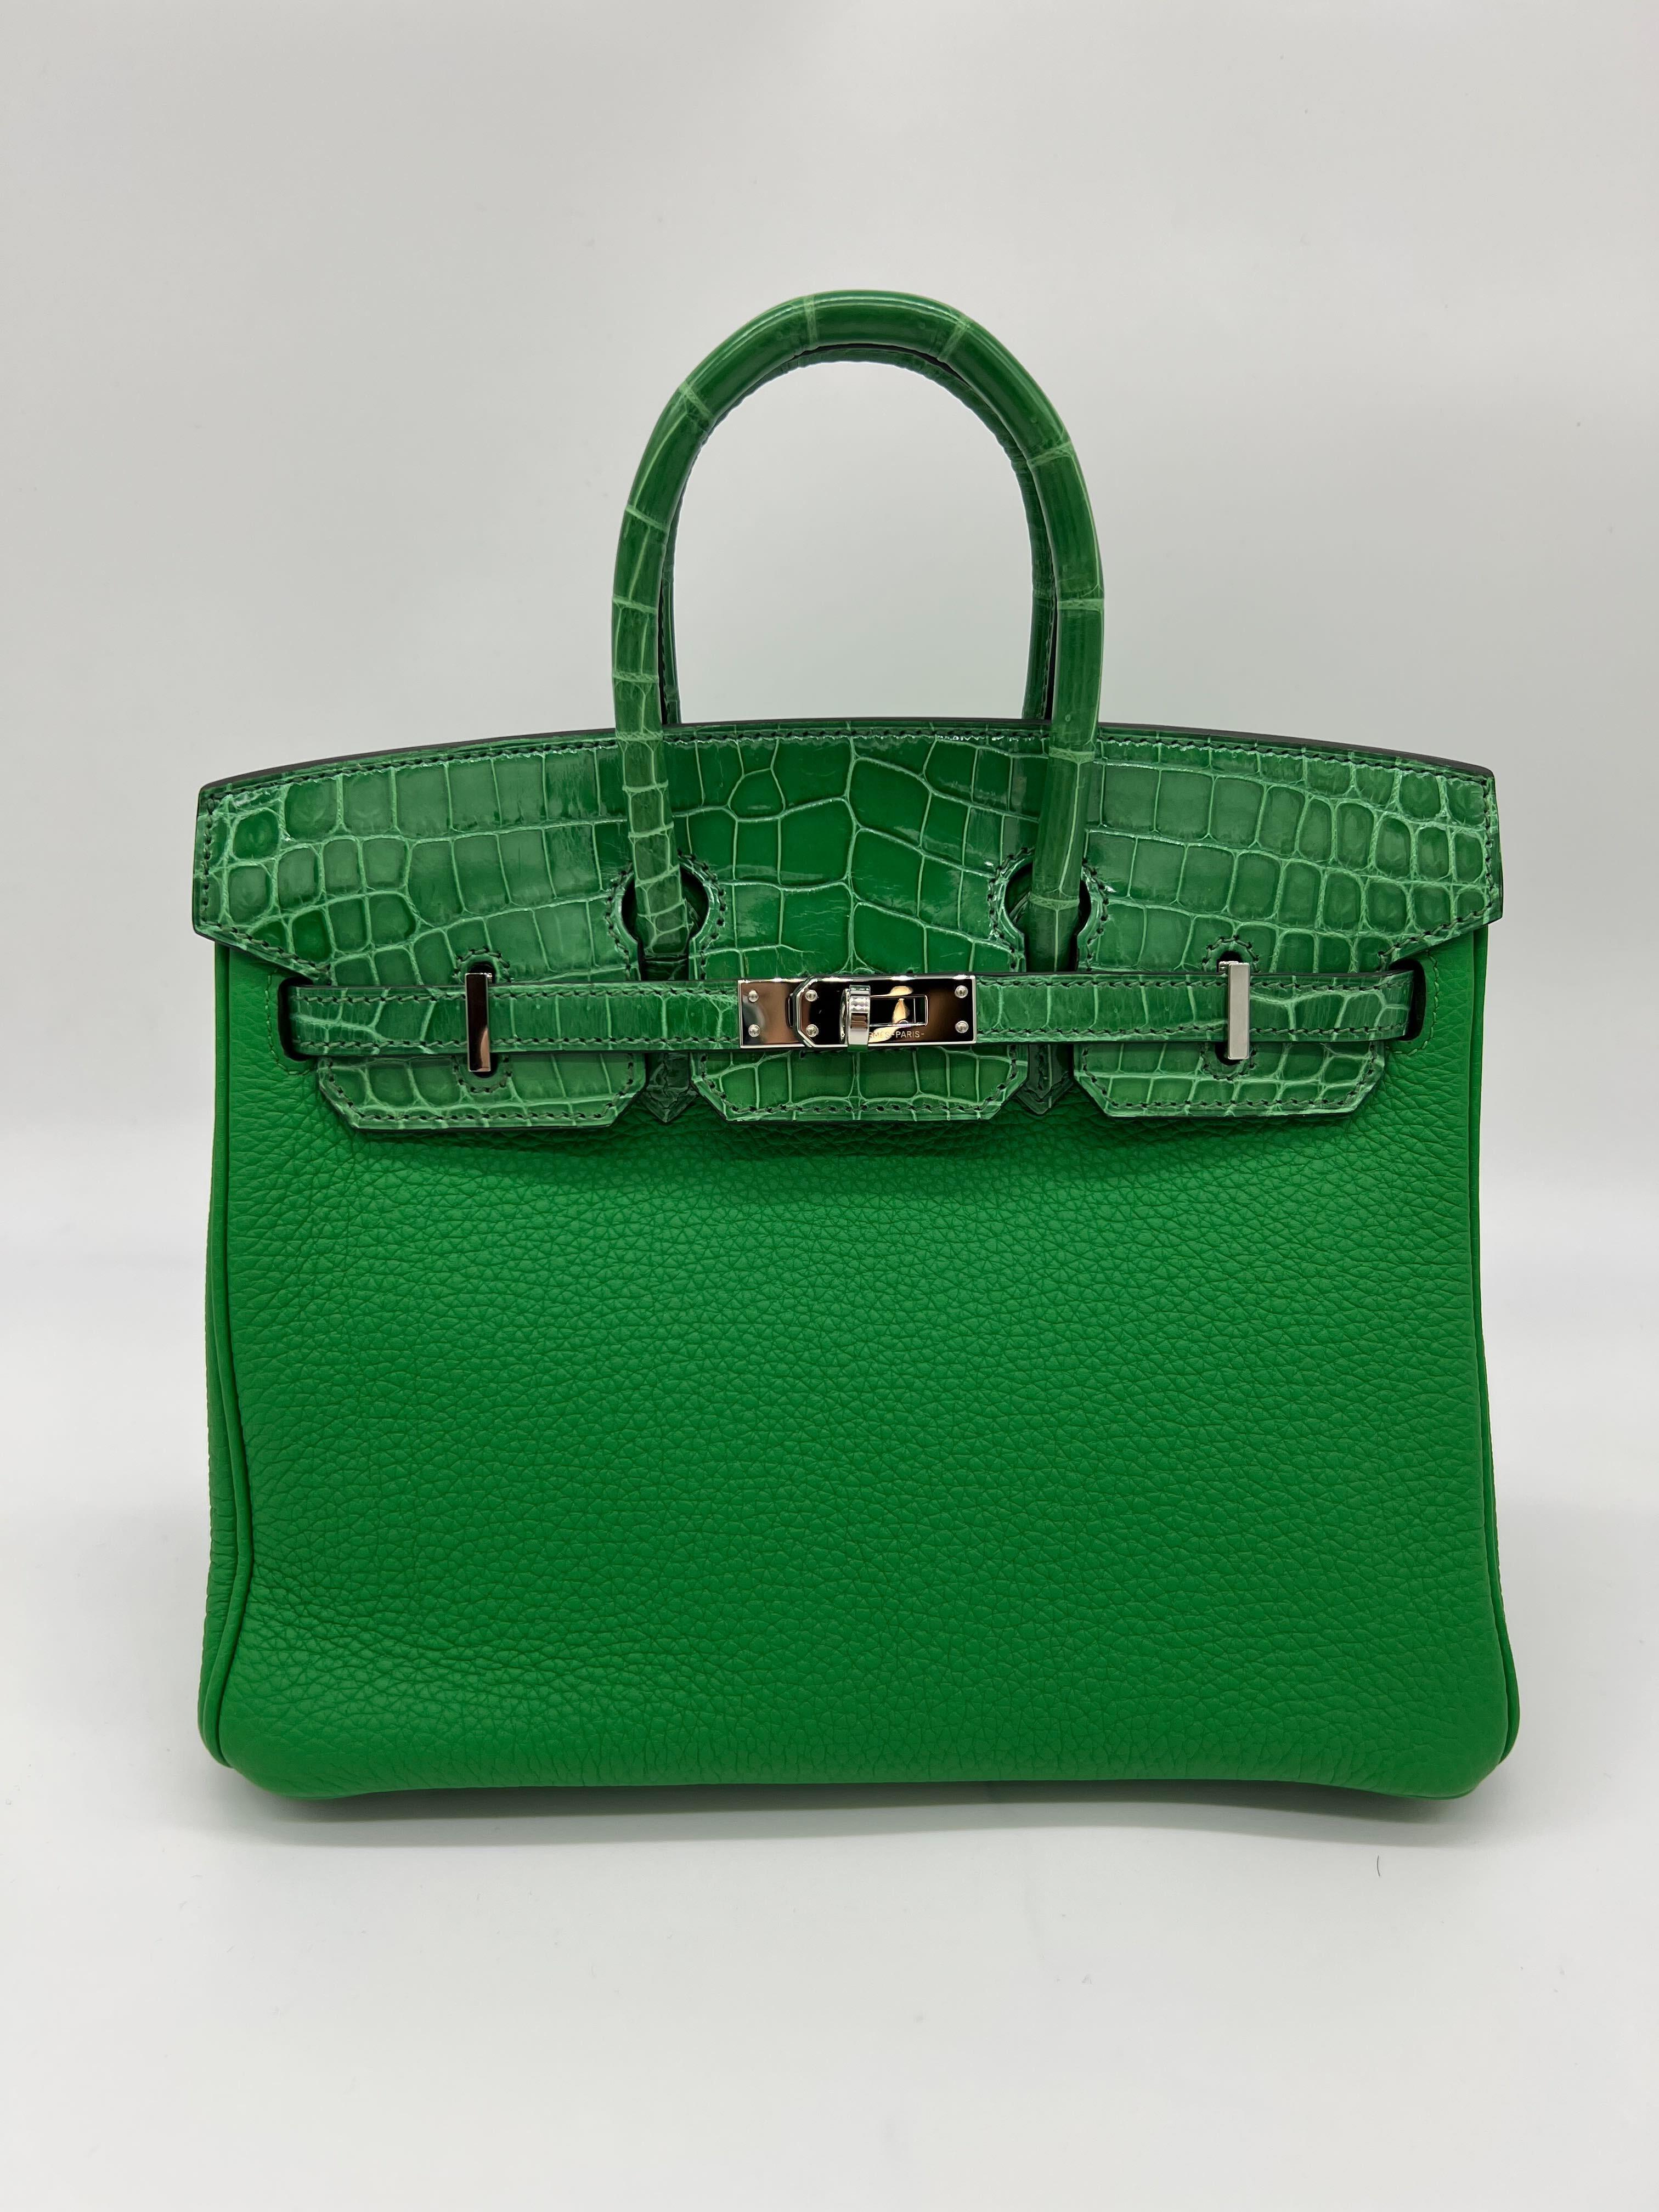 Hermes Birkin 25 Vert Bambou Shiny Niloticus Crocodile and Togo Leather, Palladium Hardware

Condition: Pre-owned (like new) 2020
Material: Shiny Niloticus Crocodile and Togo Leather
Measurements: 10